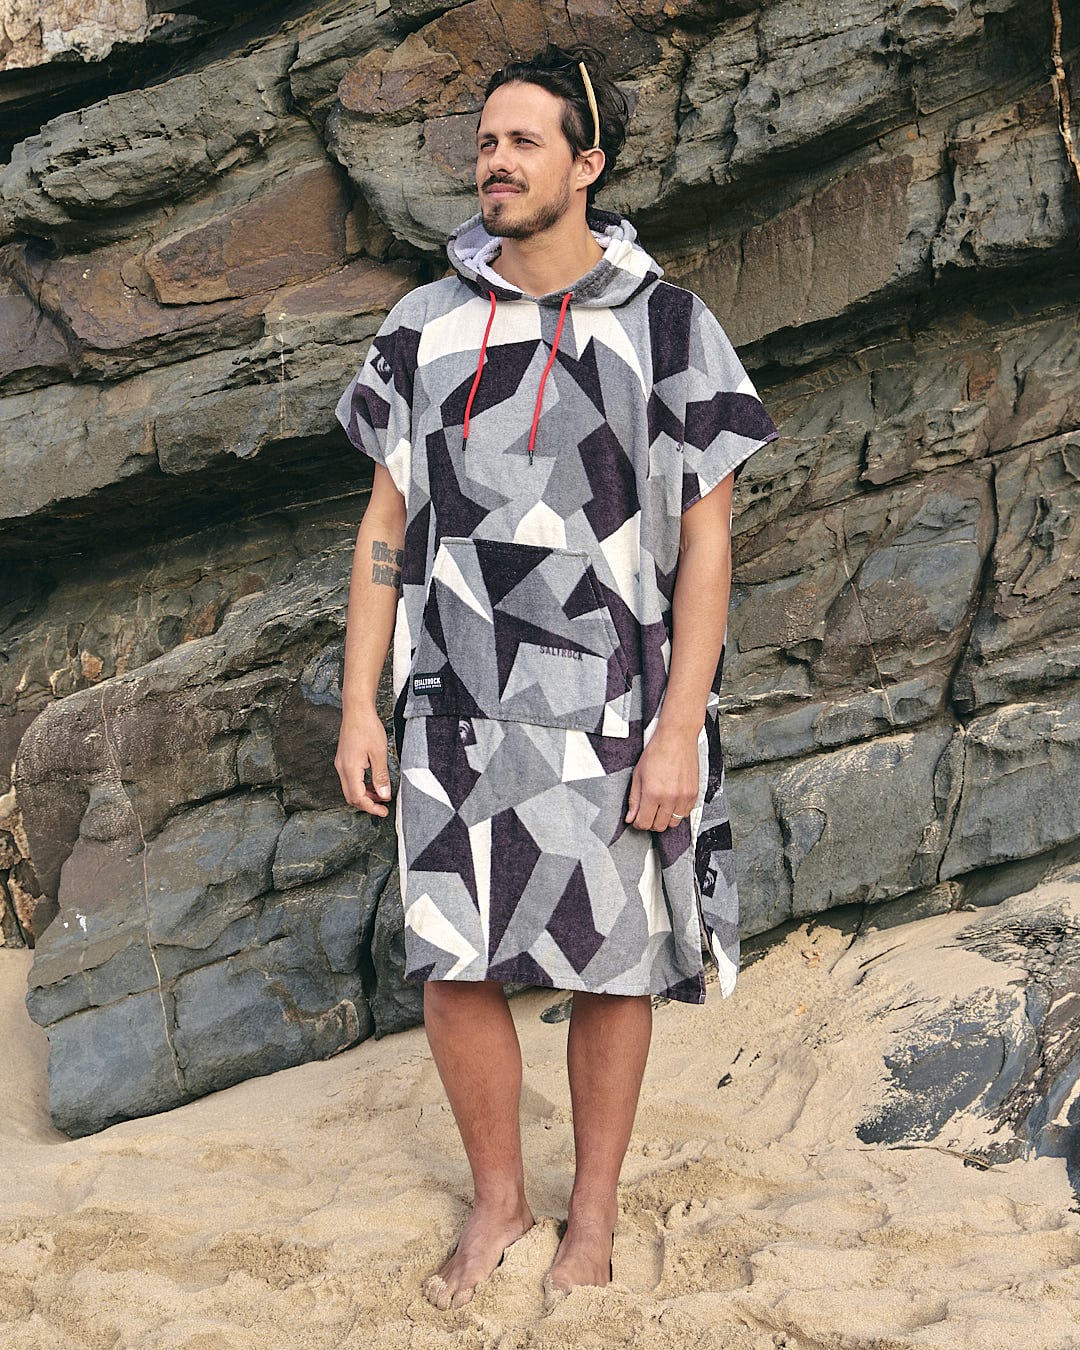 A man standing on the beach wearing a Geo Camo - Changing Towel - Grey hooded poncho made by Saltrock.